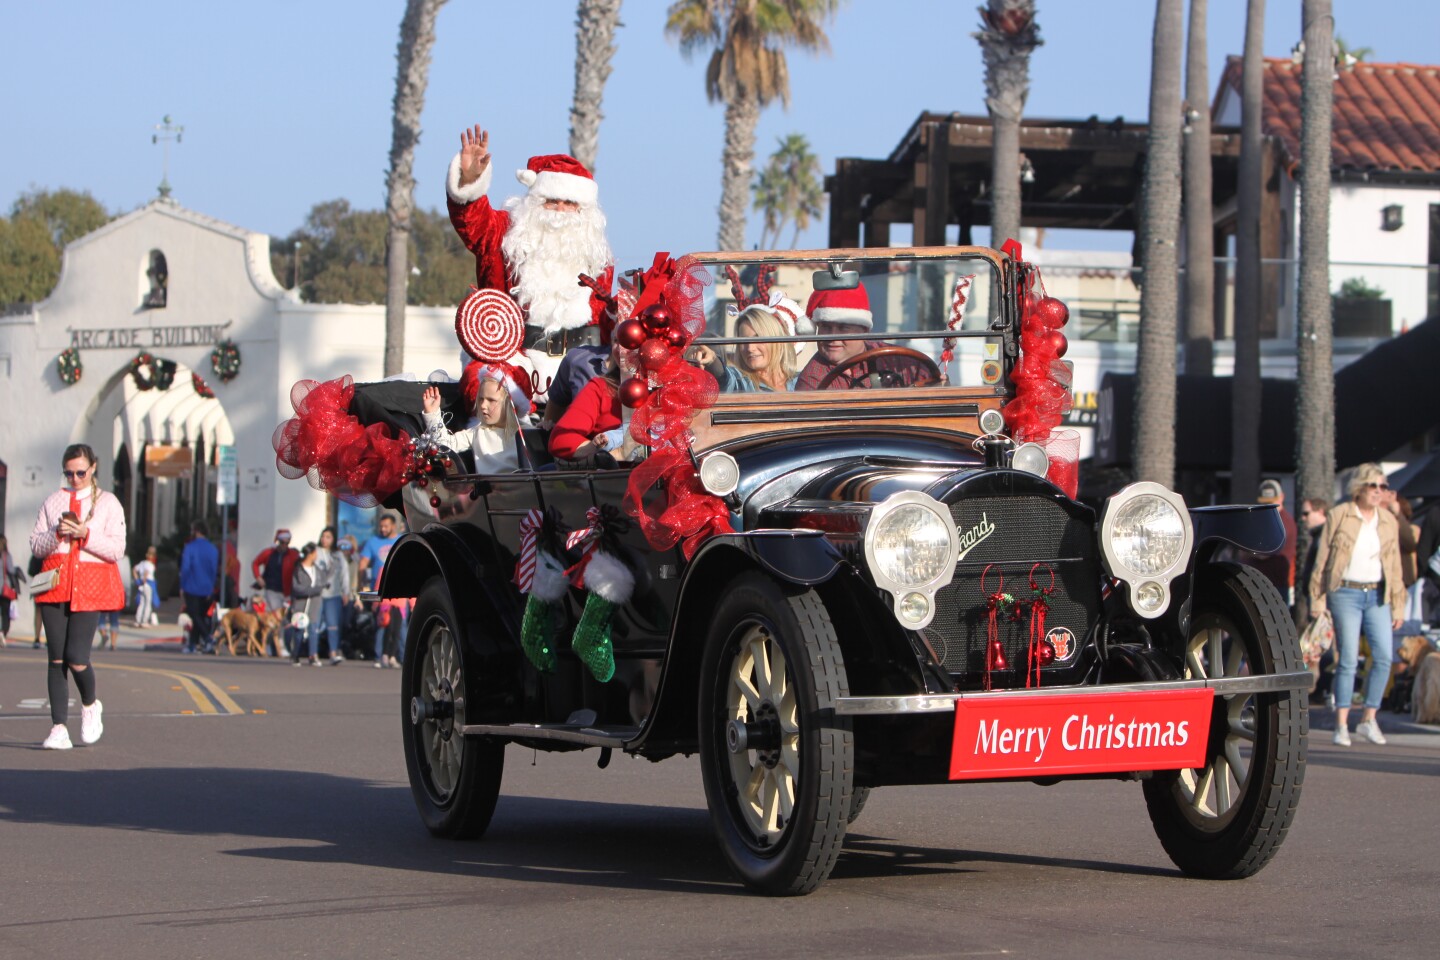 Rolling by on the traditional Old Black Goose car, Santa Claus waves during the La Jolla Christmas Parade on Dec. 5.